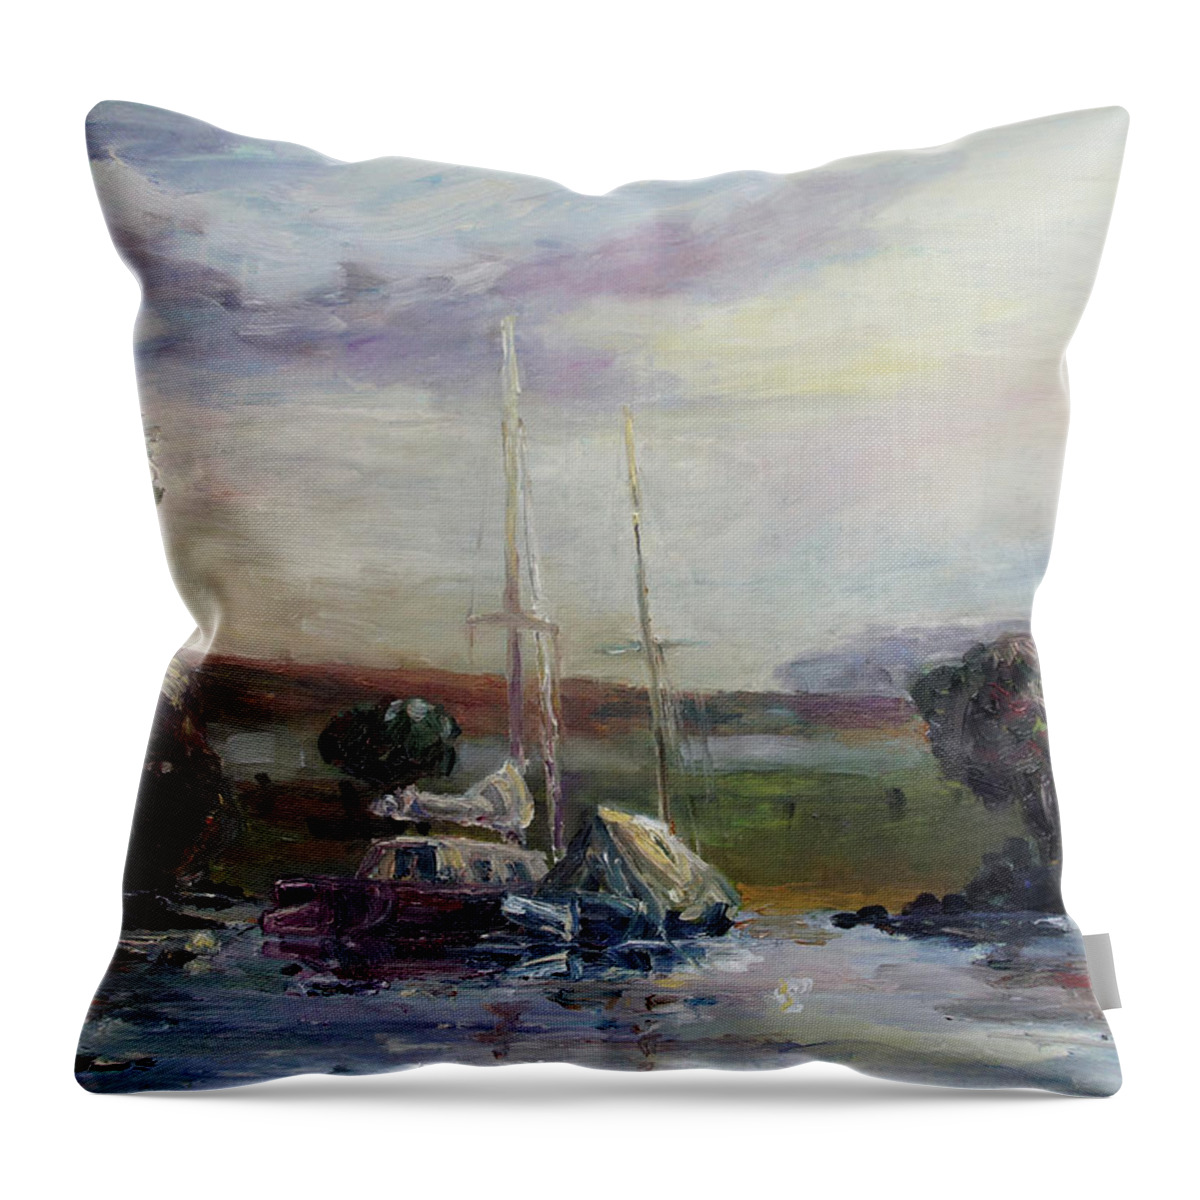 Boat Throw Pillow featuring the painting Two Tired Adventurers by Barbara Pommerenke